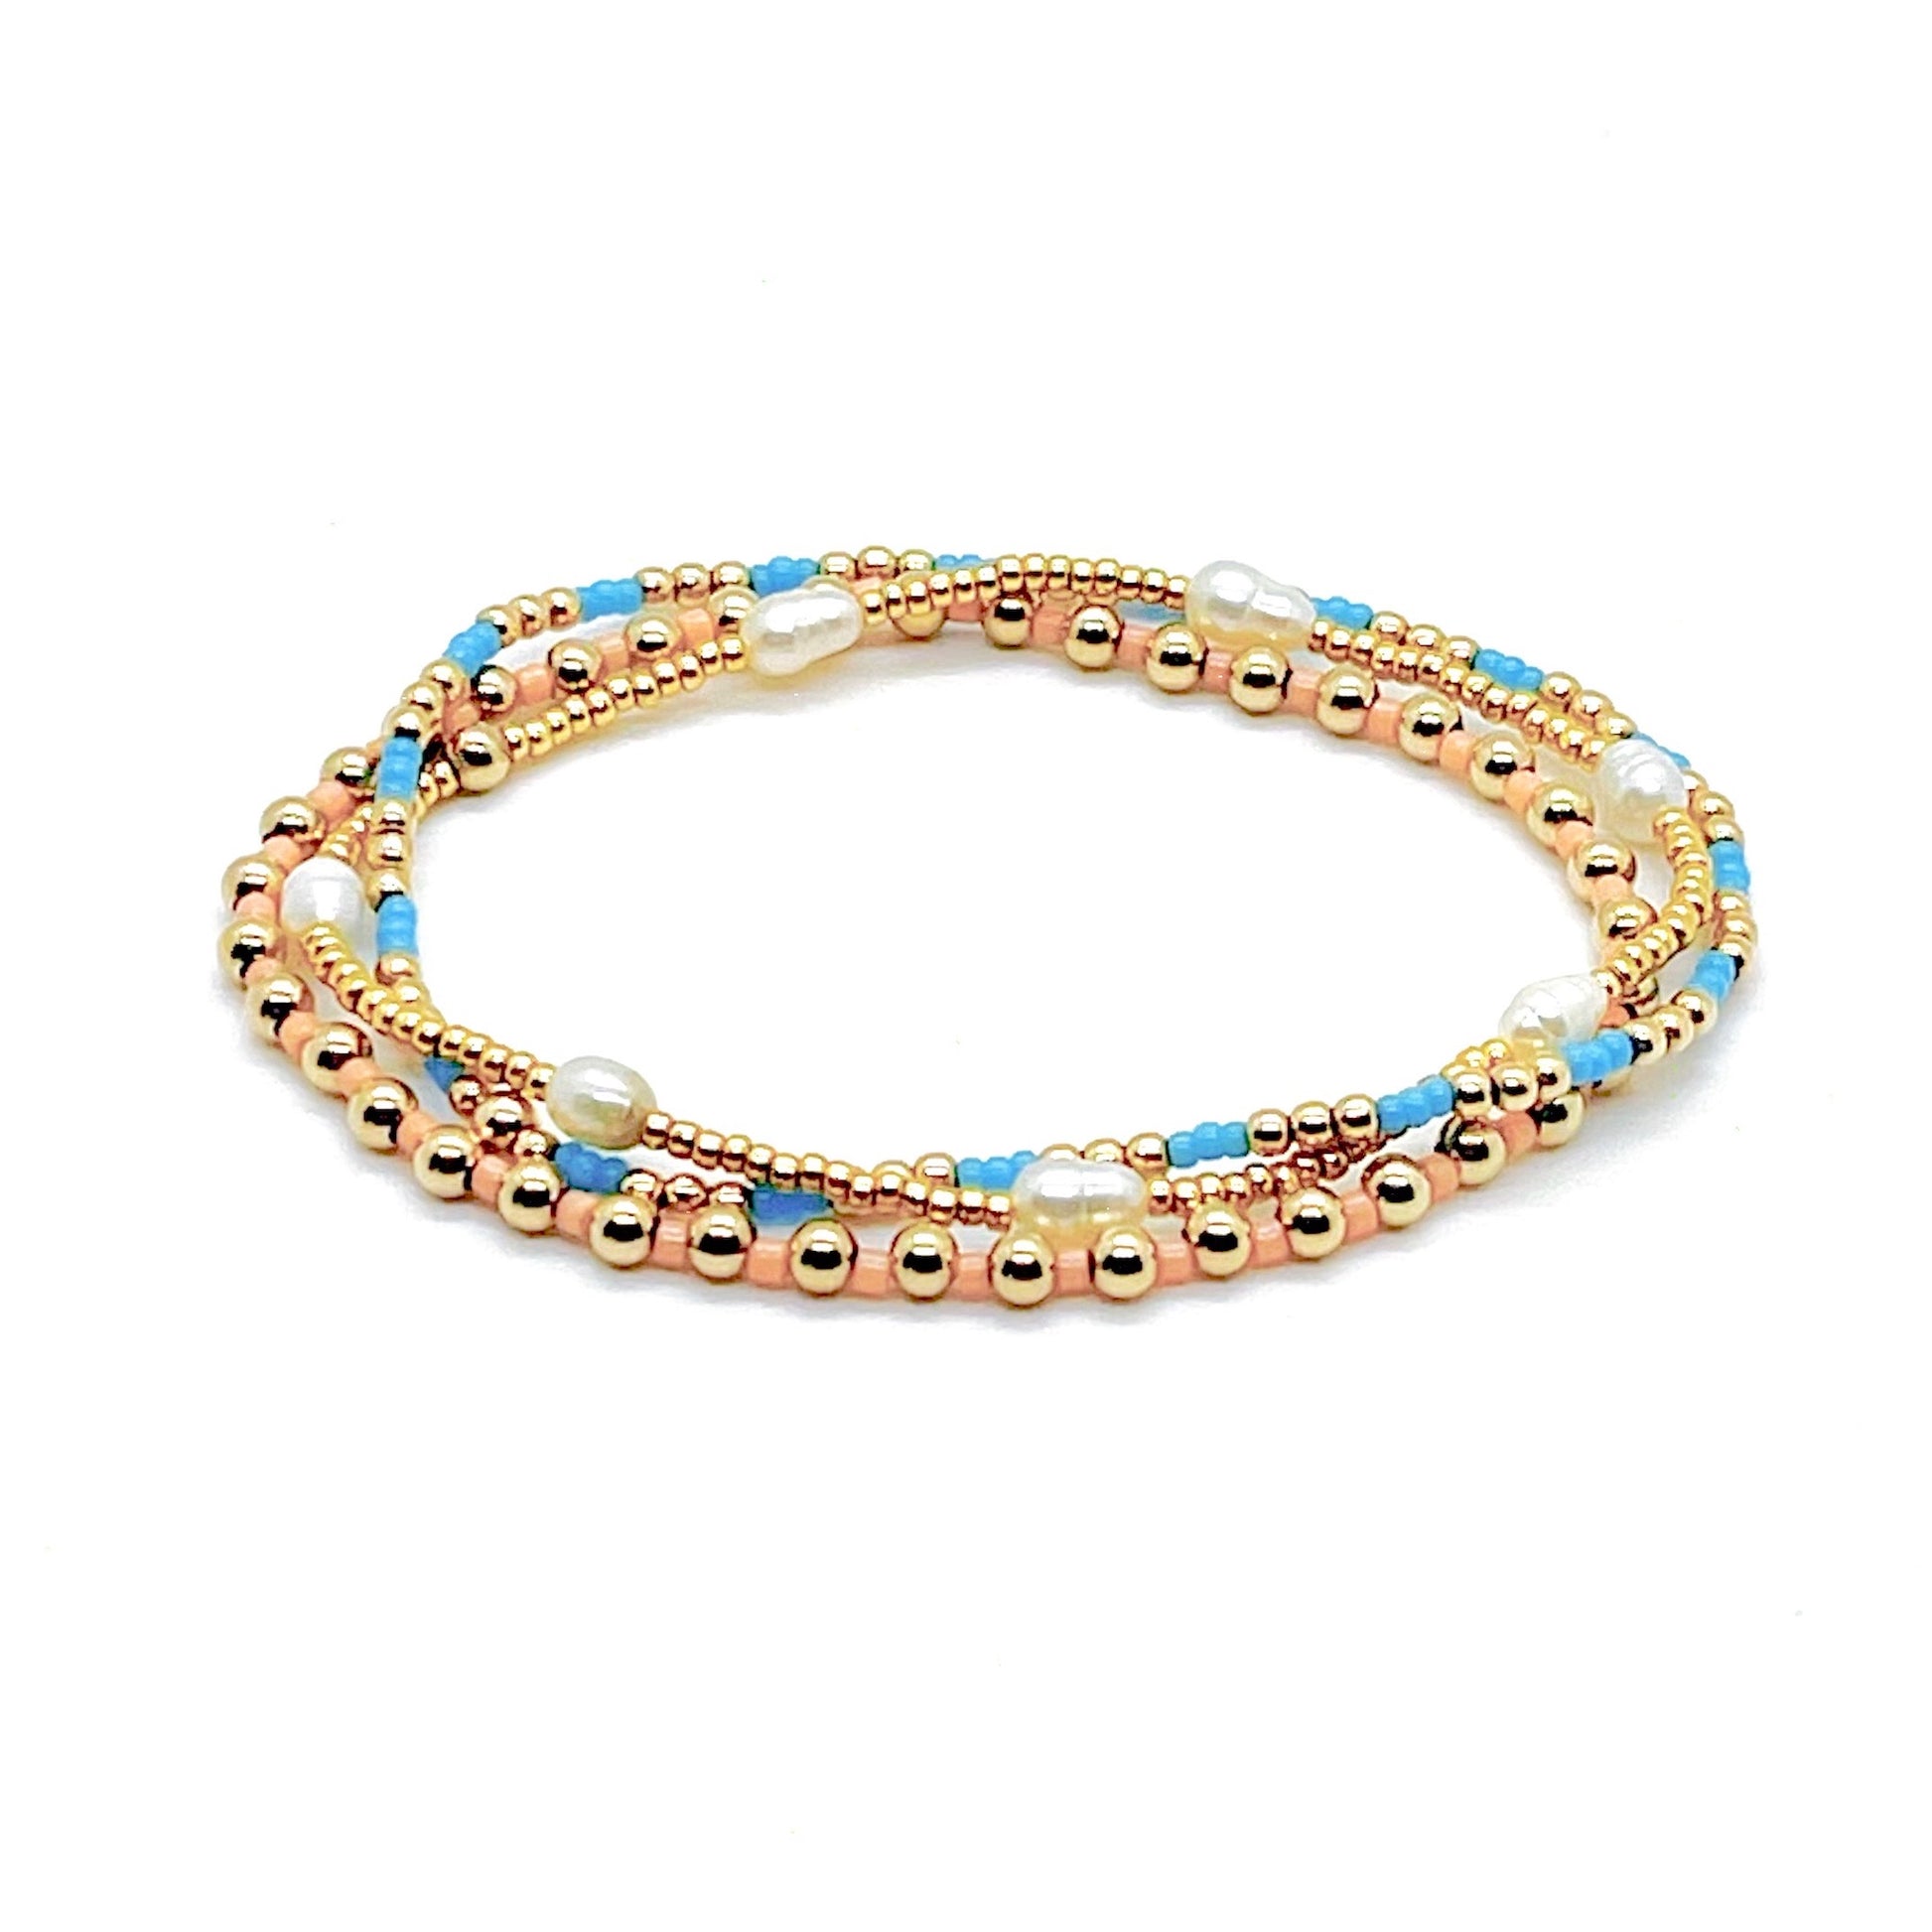 Blue, peach, and freshwater pearl gold bracelet stack of 3 stretch bracelets.